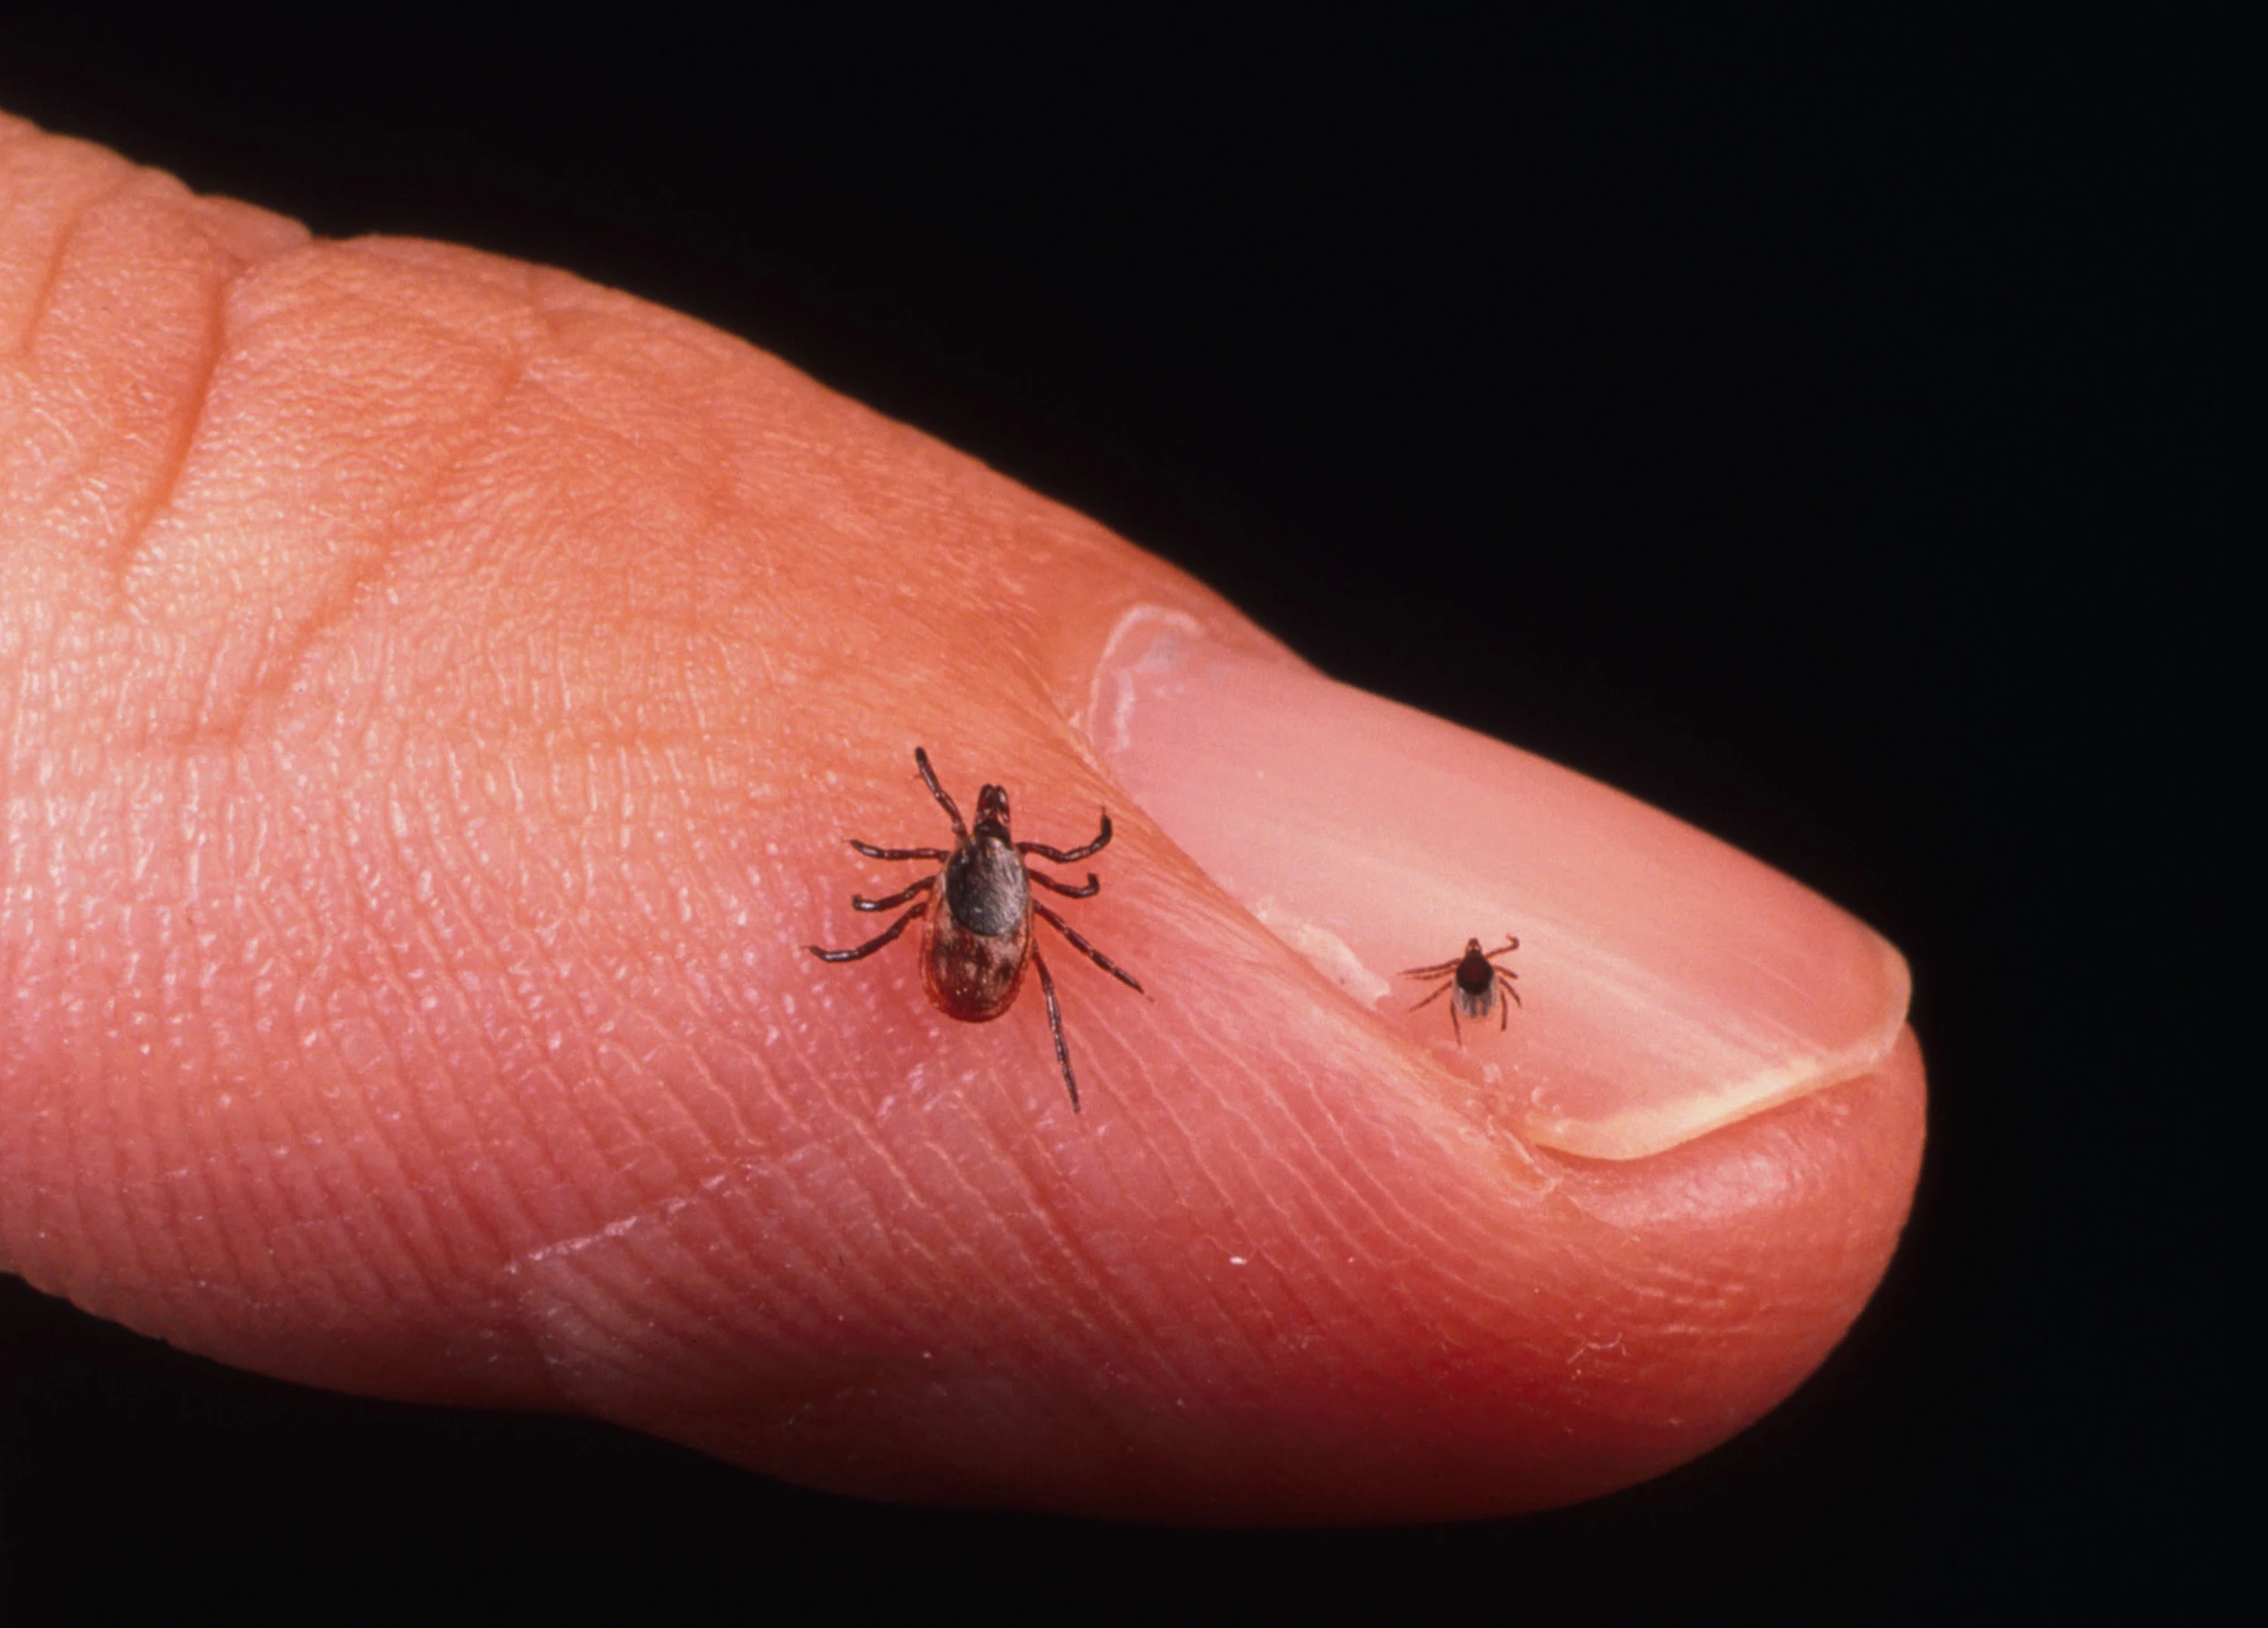 Don't Use Vaseline To Get A Tick Out Of Your Skin